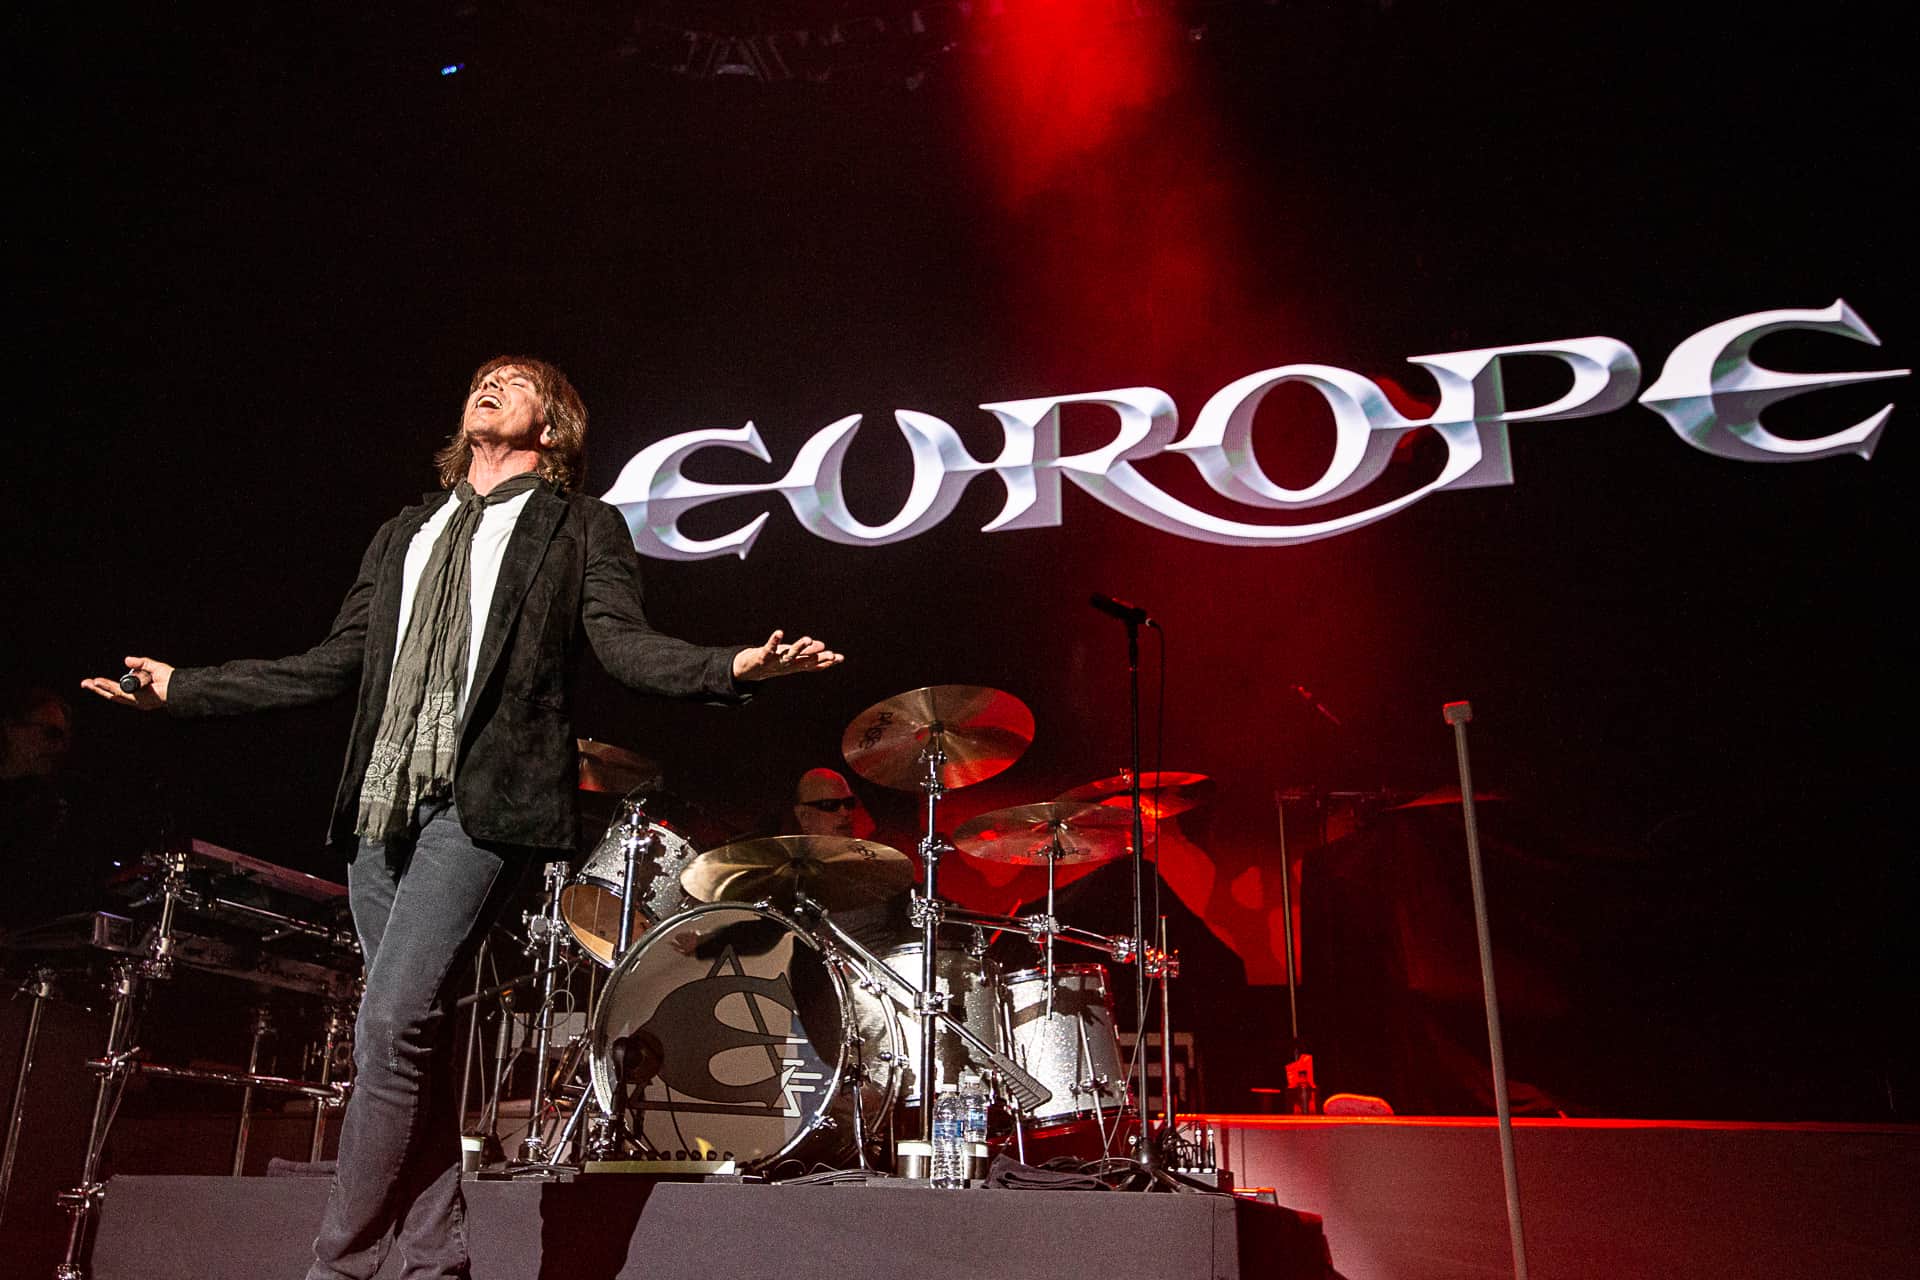  Europe - The Final Countdown 30th Anniversary Show